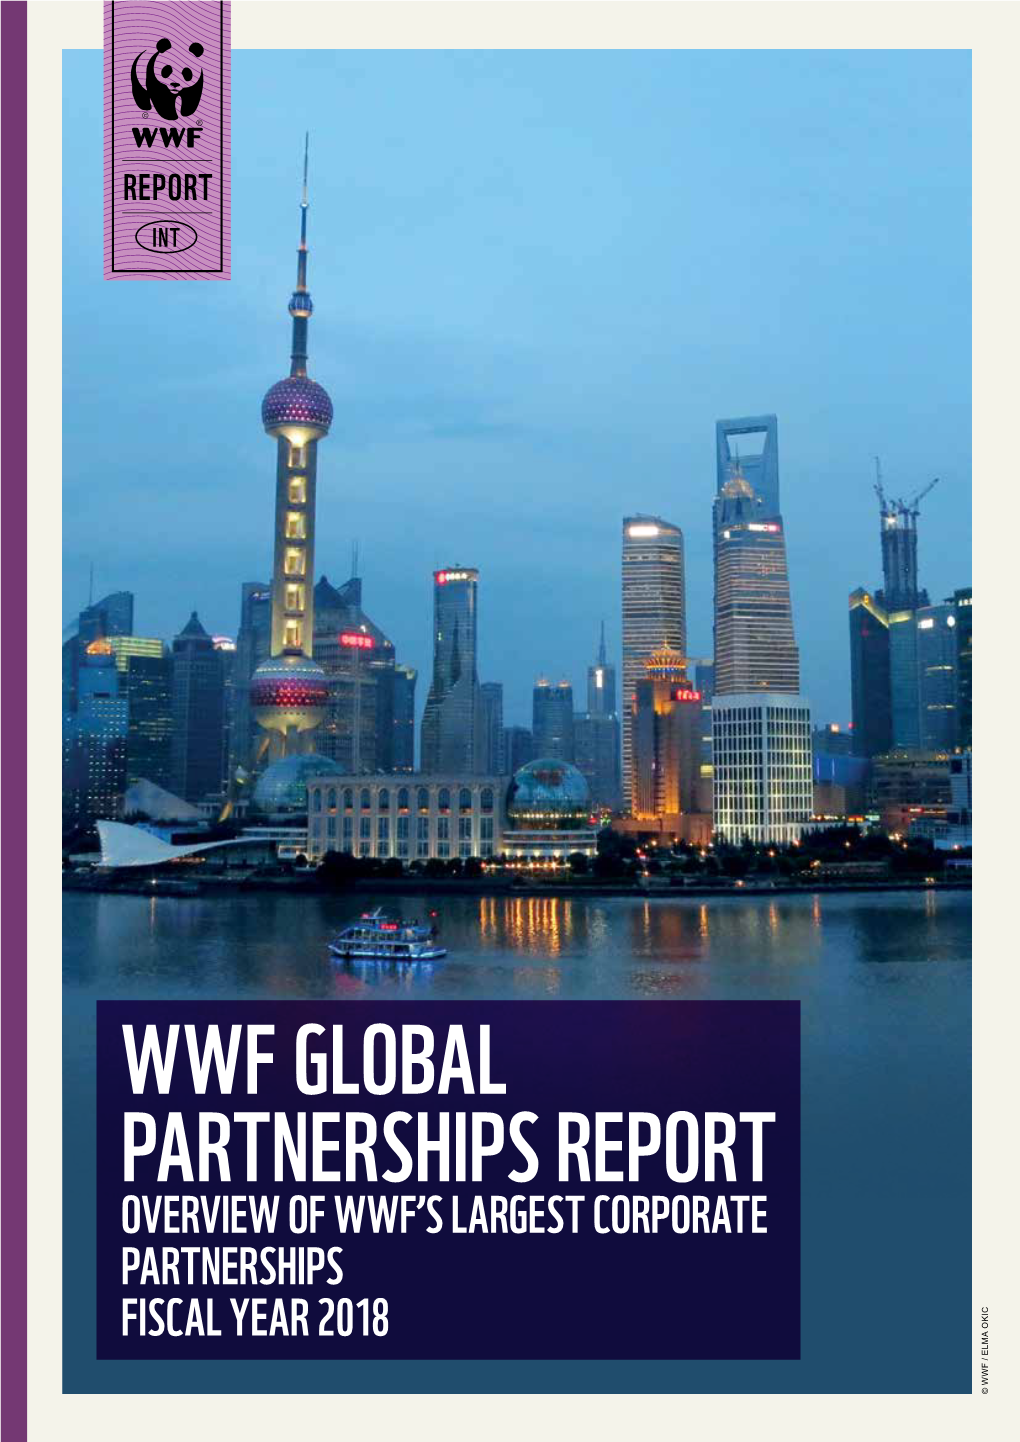 WWF GLOBAL PARTNERSHIPS REPORT OVERVIEW of WWF’S LARGEST CORPORATE PARTNERSHIPS FISCAL YEAR 2018 © WWF / ELMA OKIC WWF Global Partnerships Report – 2018